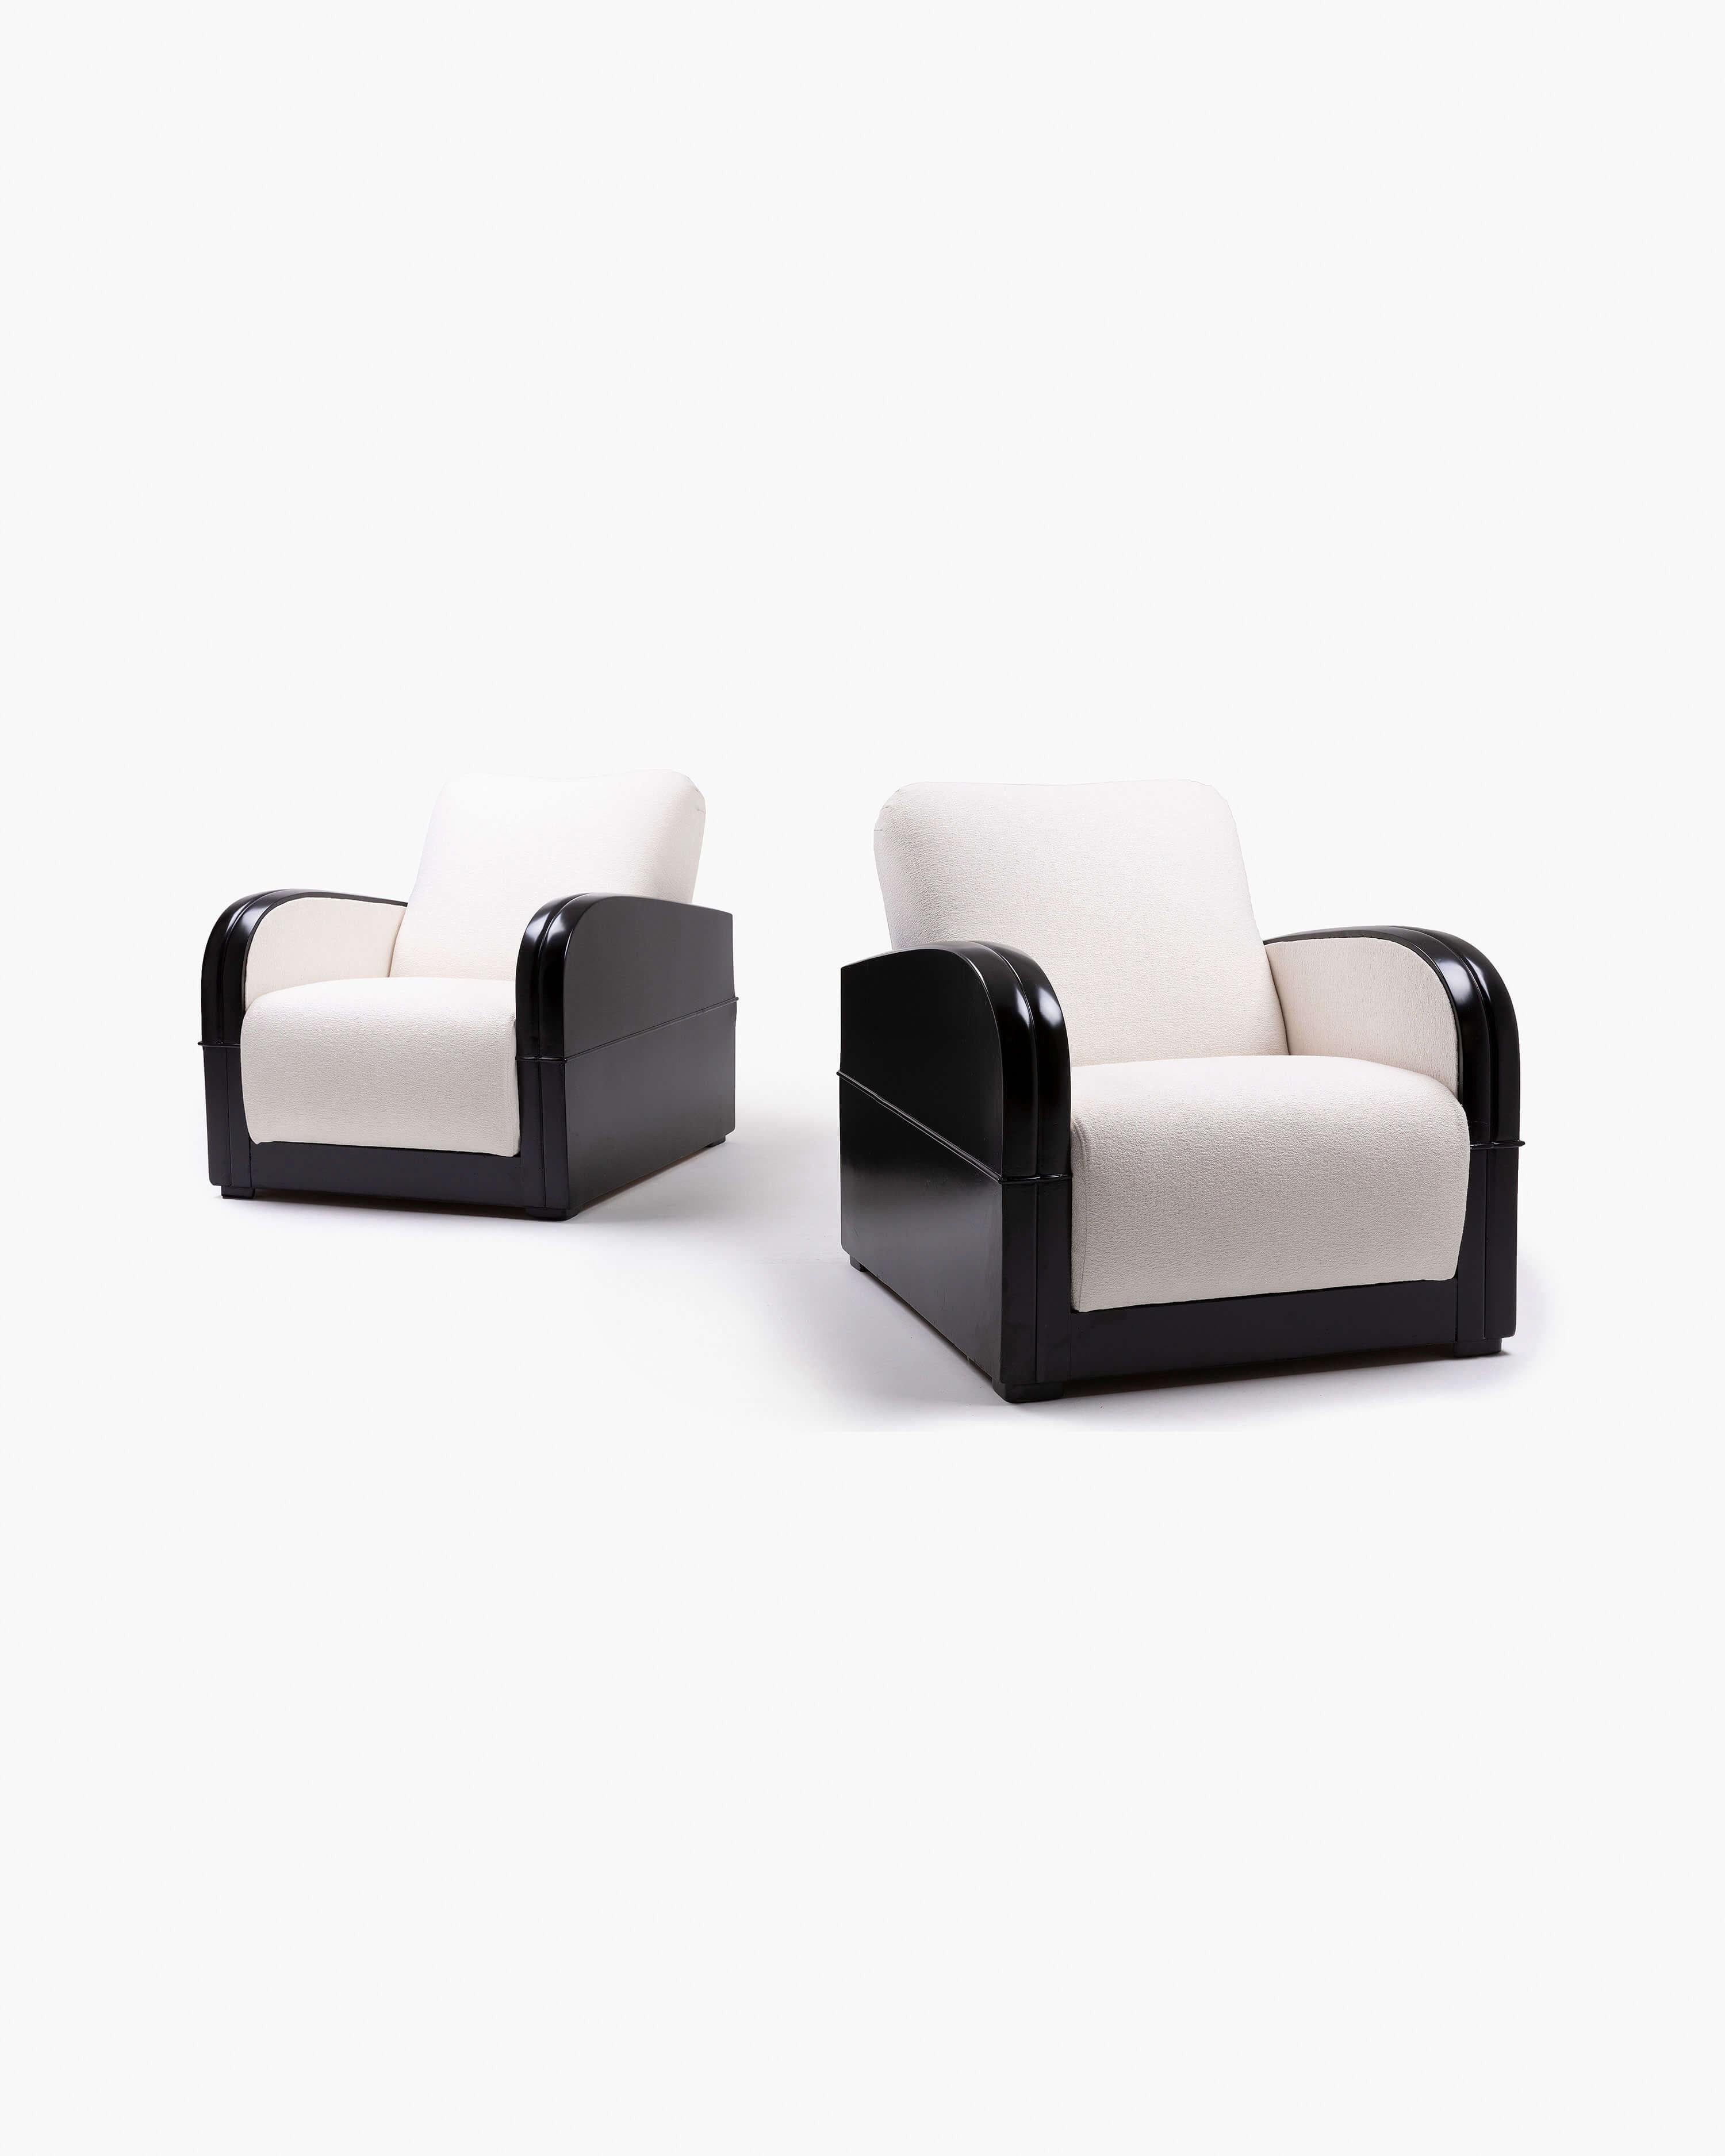 Pair of Italian Art Deco Club Chairs in Black Lacquer and White Bouclé In Excellent Condition For Sale In Beverly Hills, CA